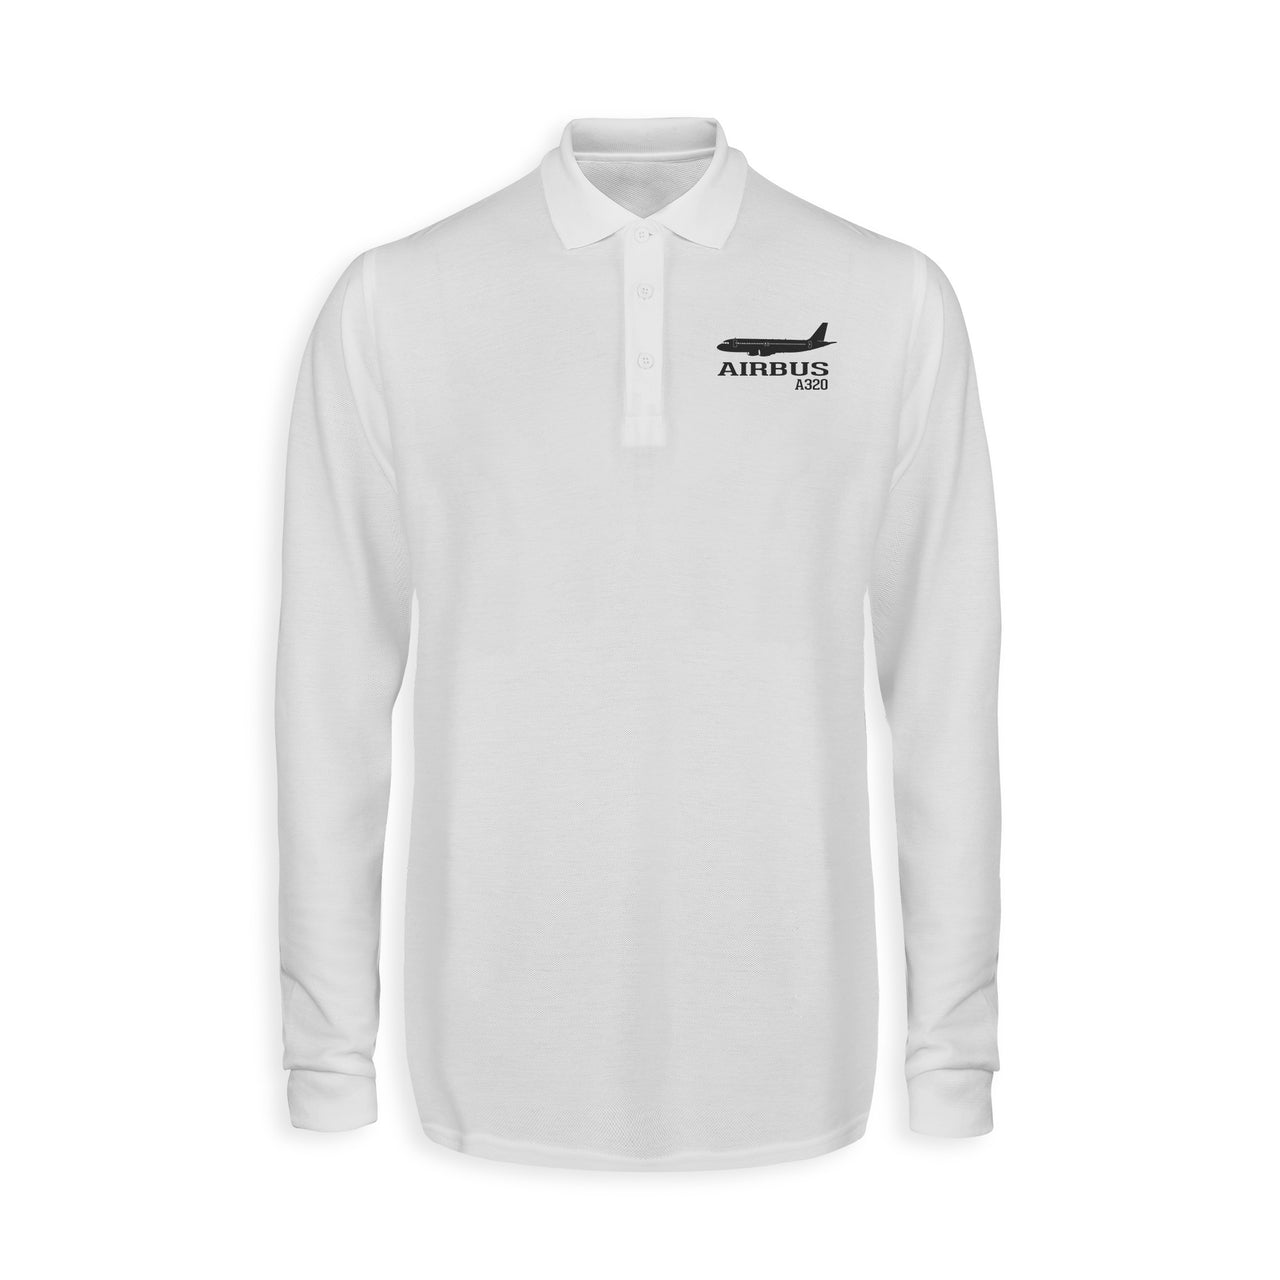 Airbus A320 Printed Designed Long Sleeve Polo T-Shirts